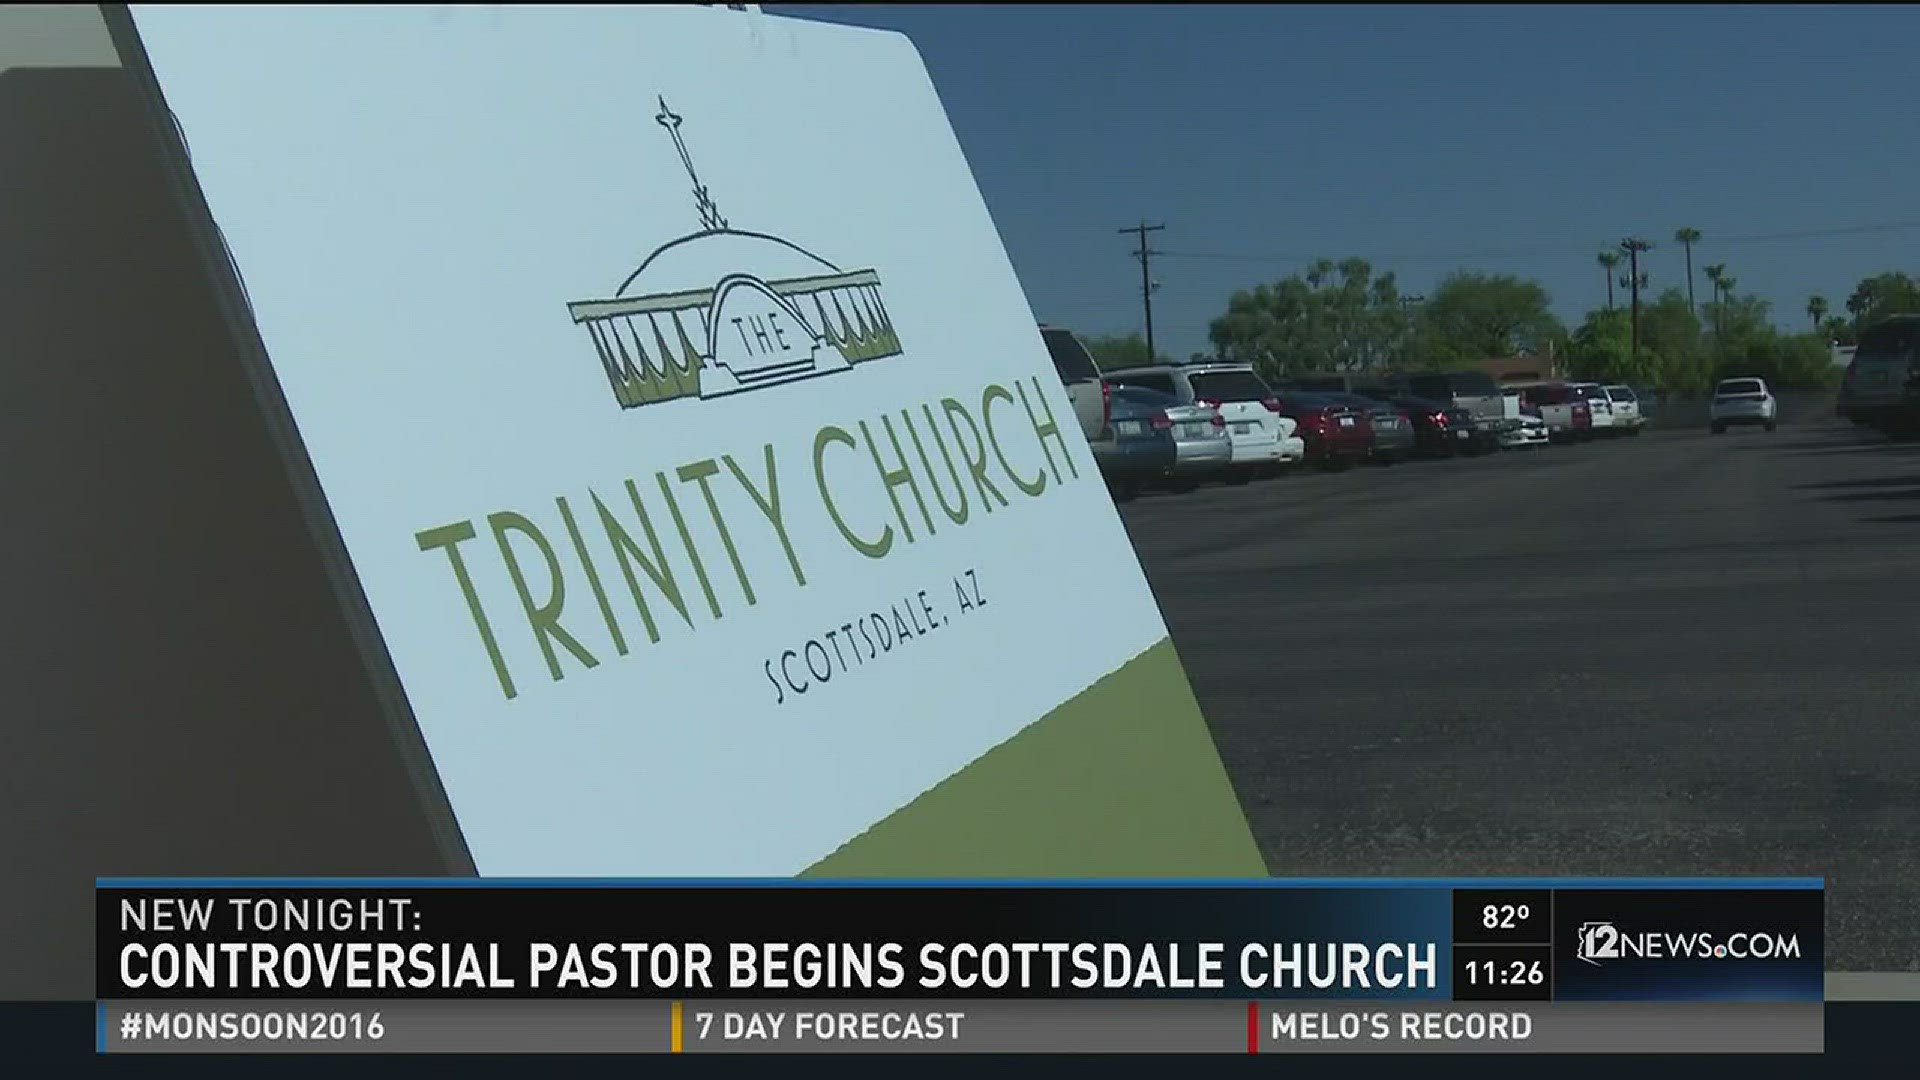 Controversial pastor begins Scottsdale church.